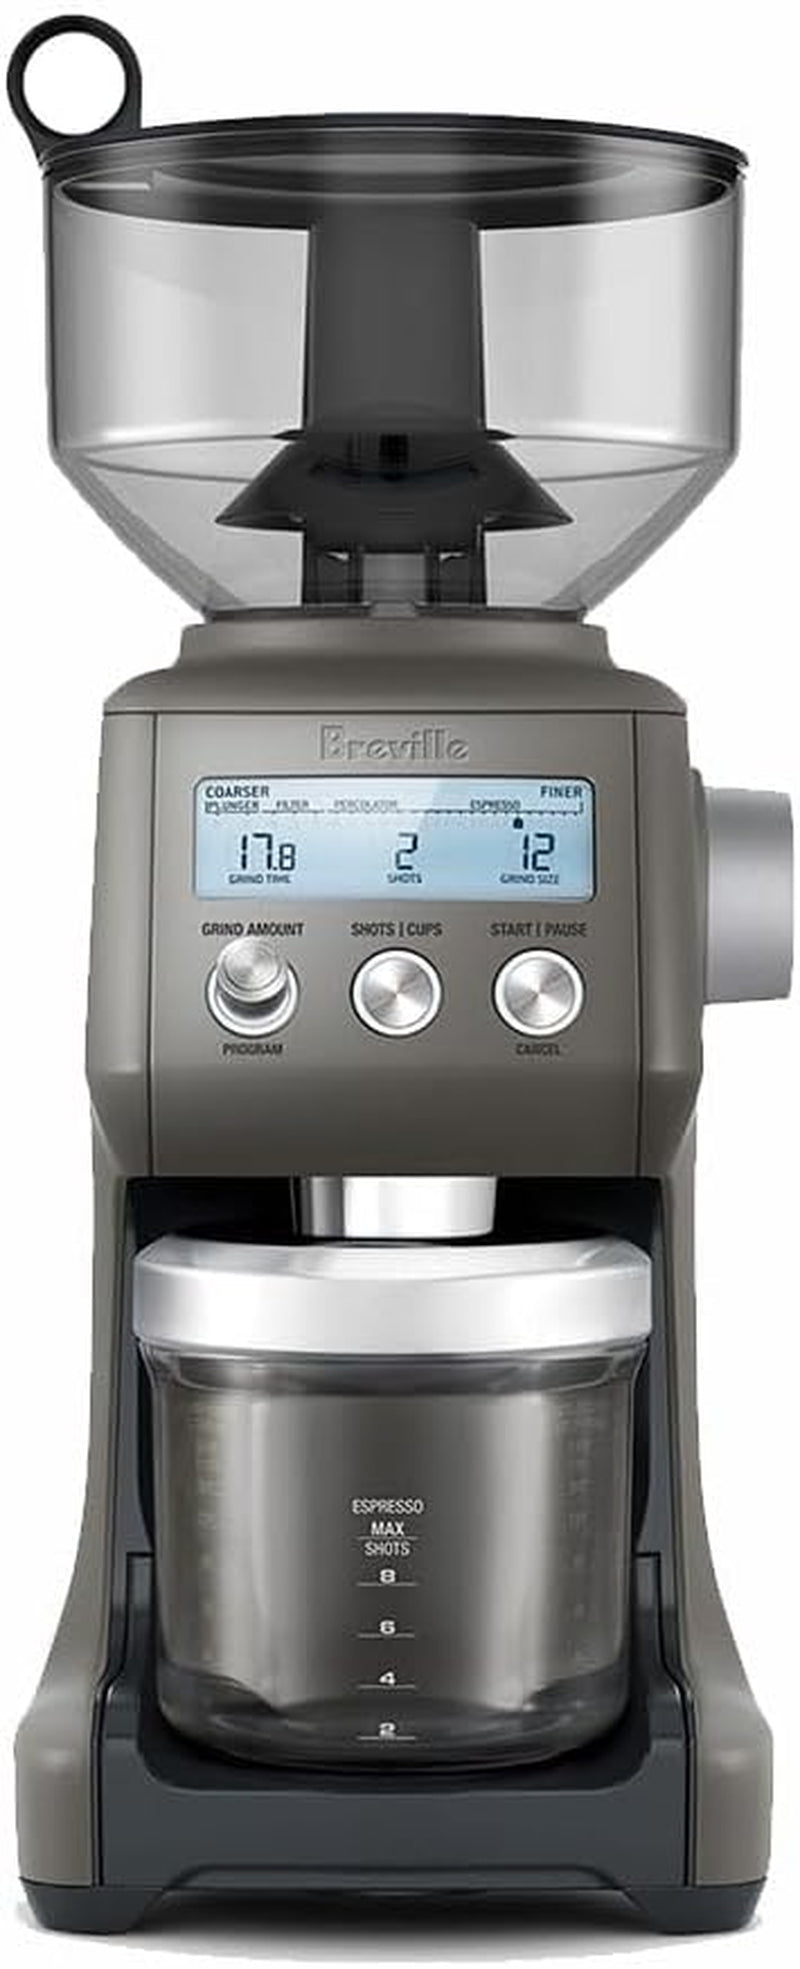 Breville Smart Grinder Pro Coffee Bean Grinder, Brushed Stainless Steel, BCG820BSS, 2.3